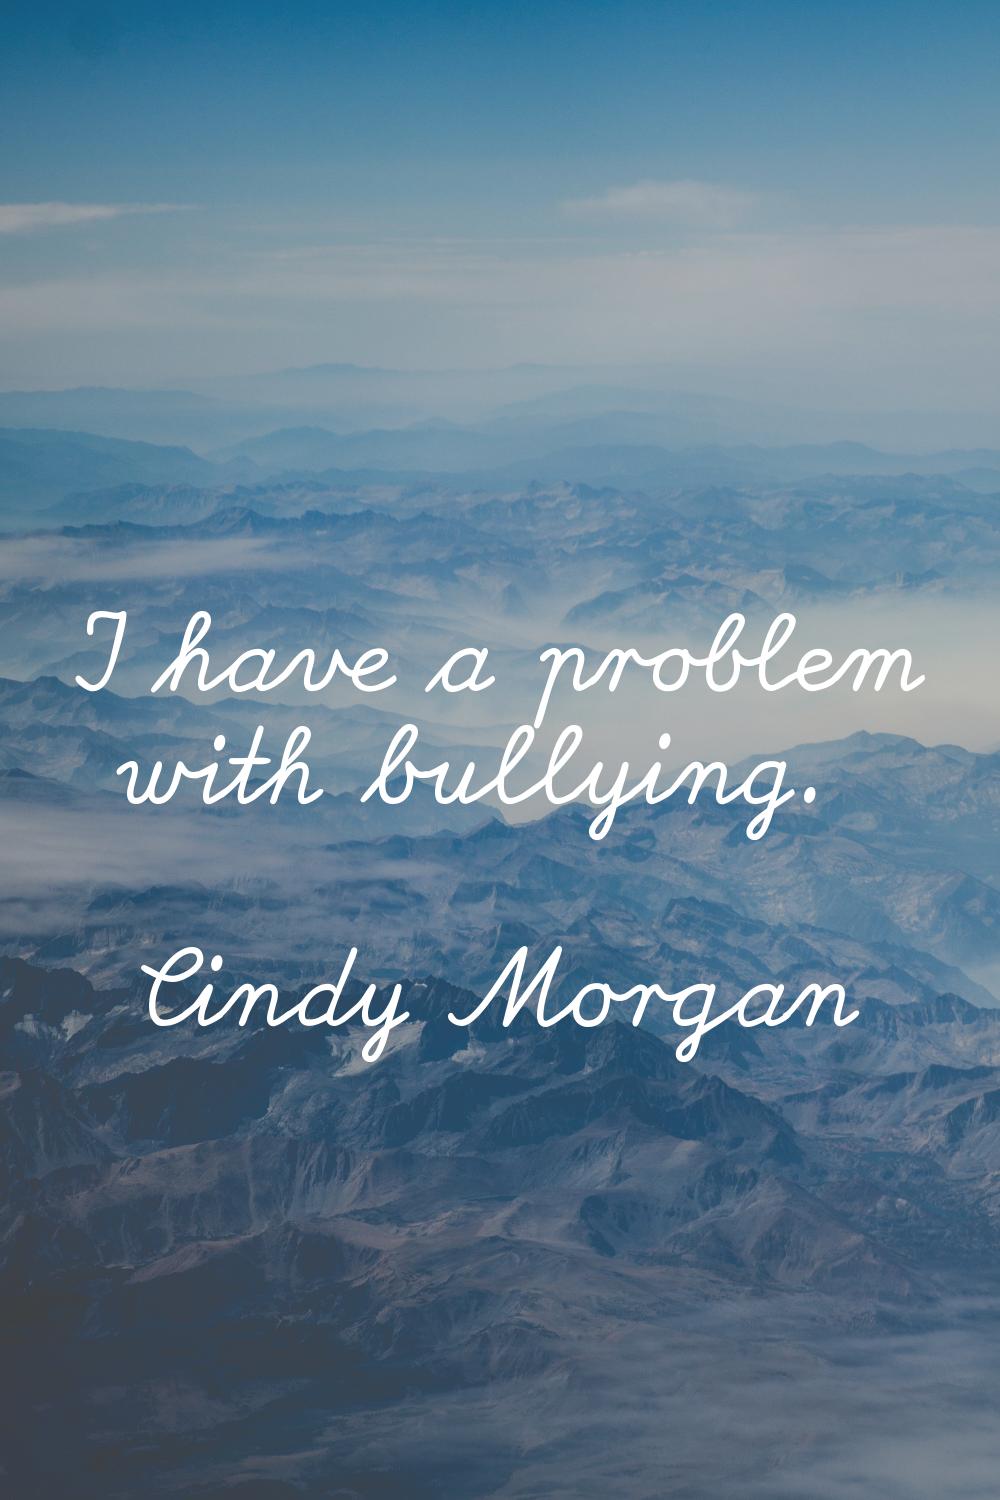 I have a problem with bullying.